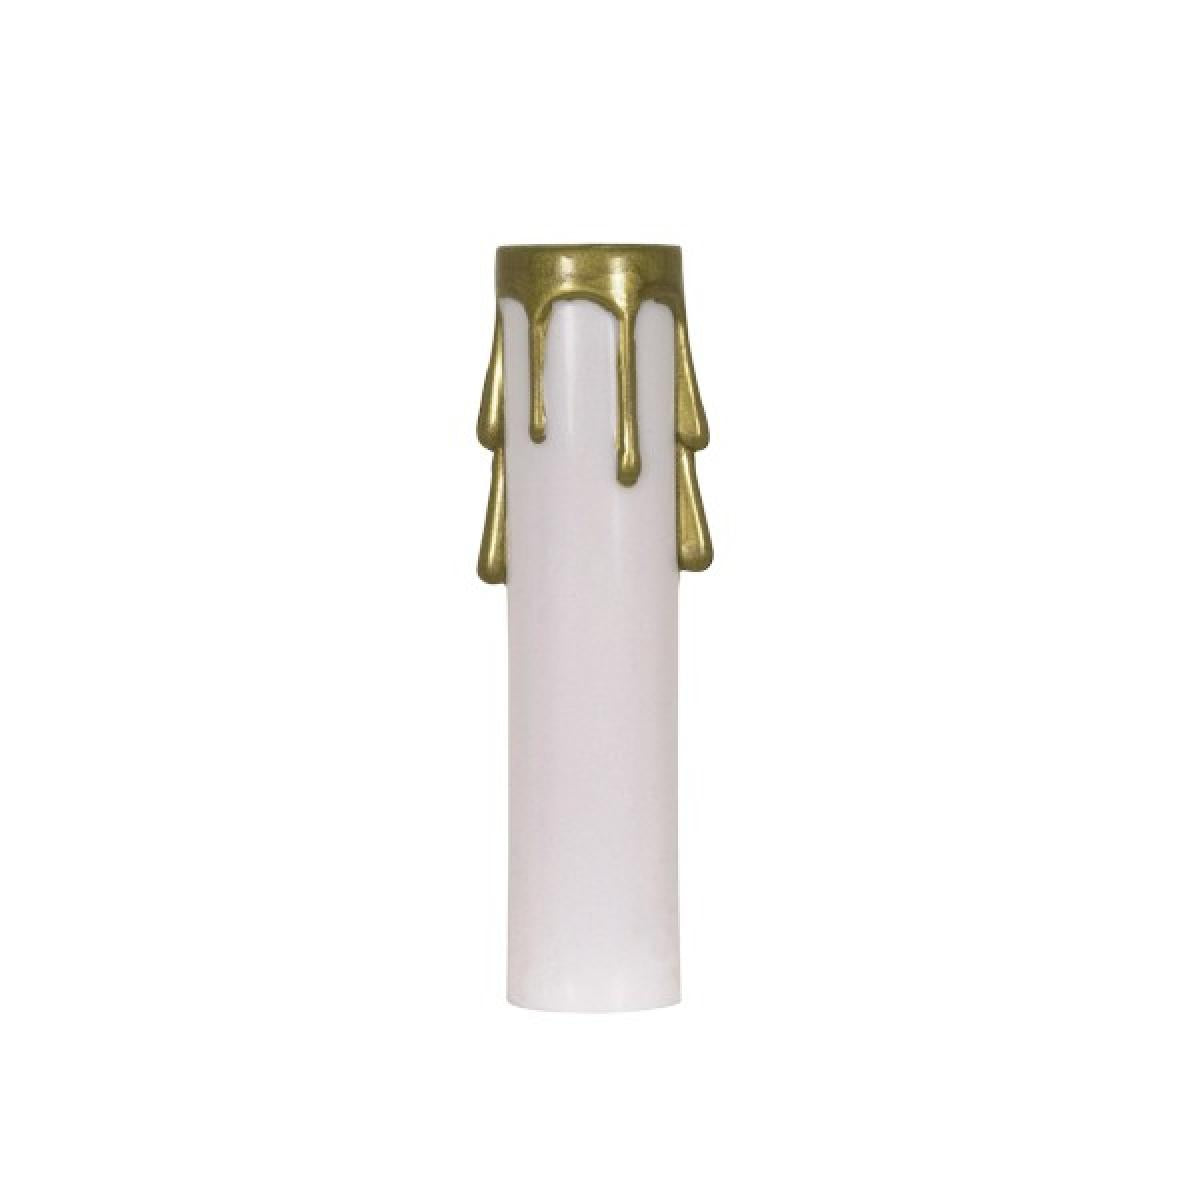 Satco 90-1509 Plastic Drip Candle Cover White Plastic With Gold Drip 13/16" Inside Diameter 7/8" Outside Diameter 2" Height